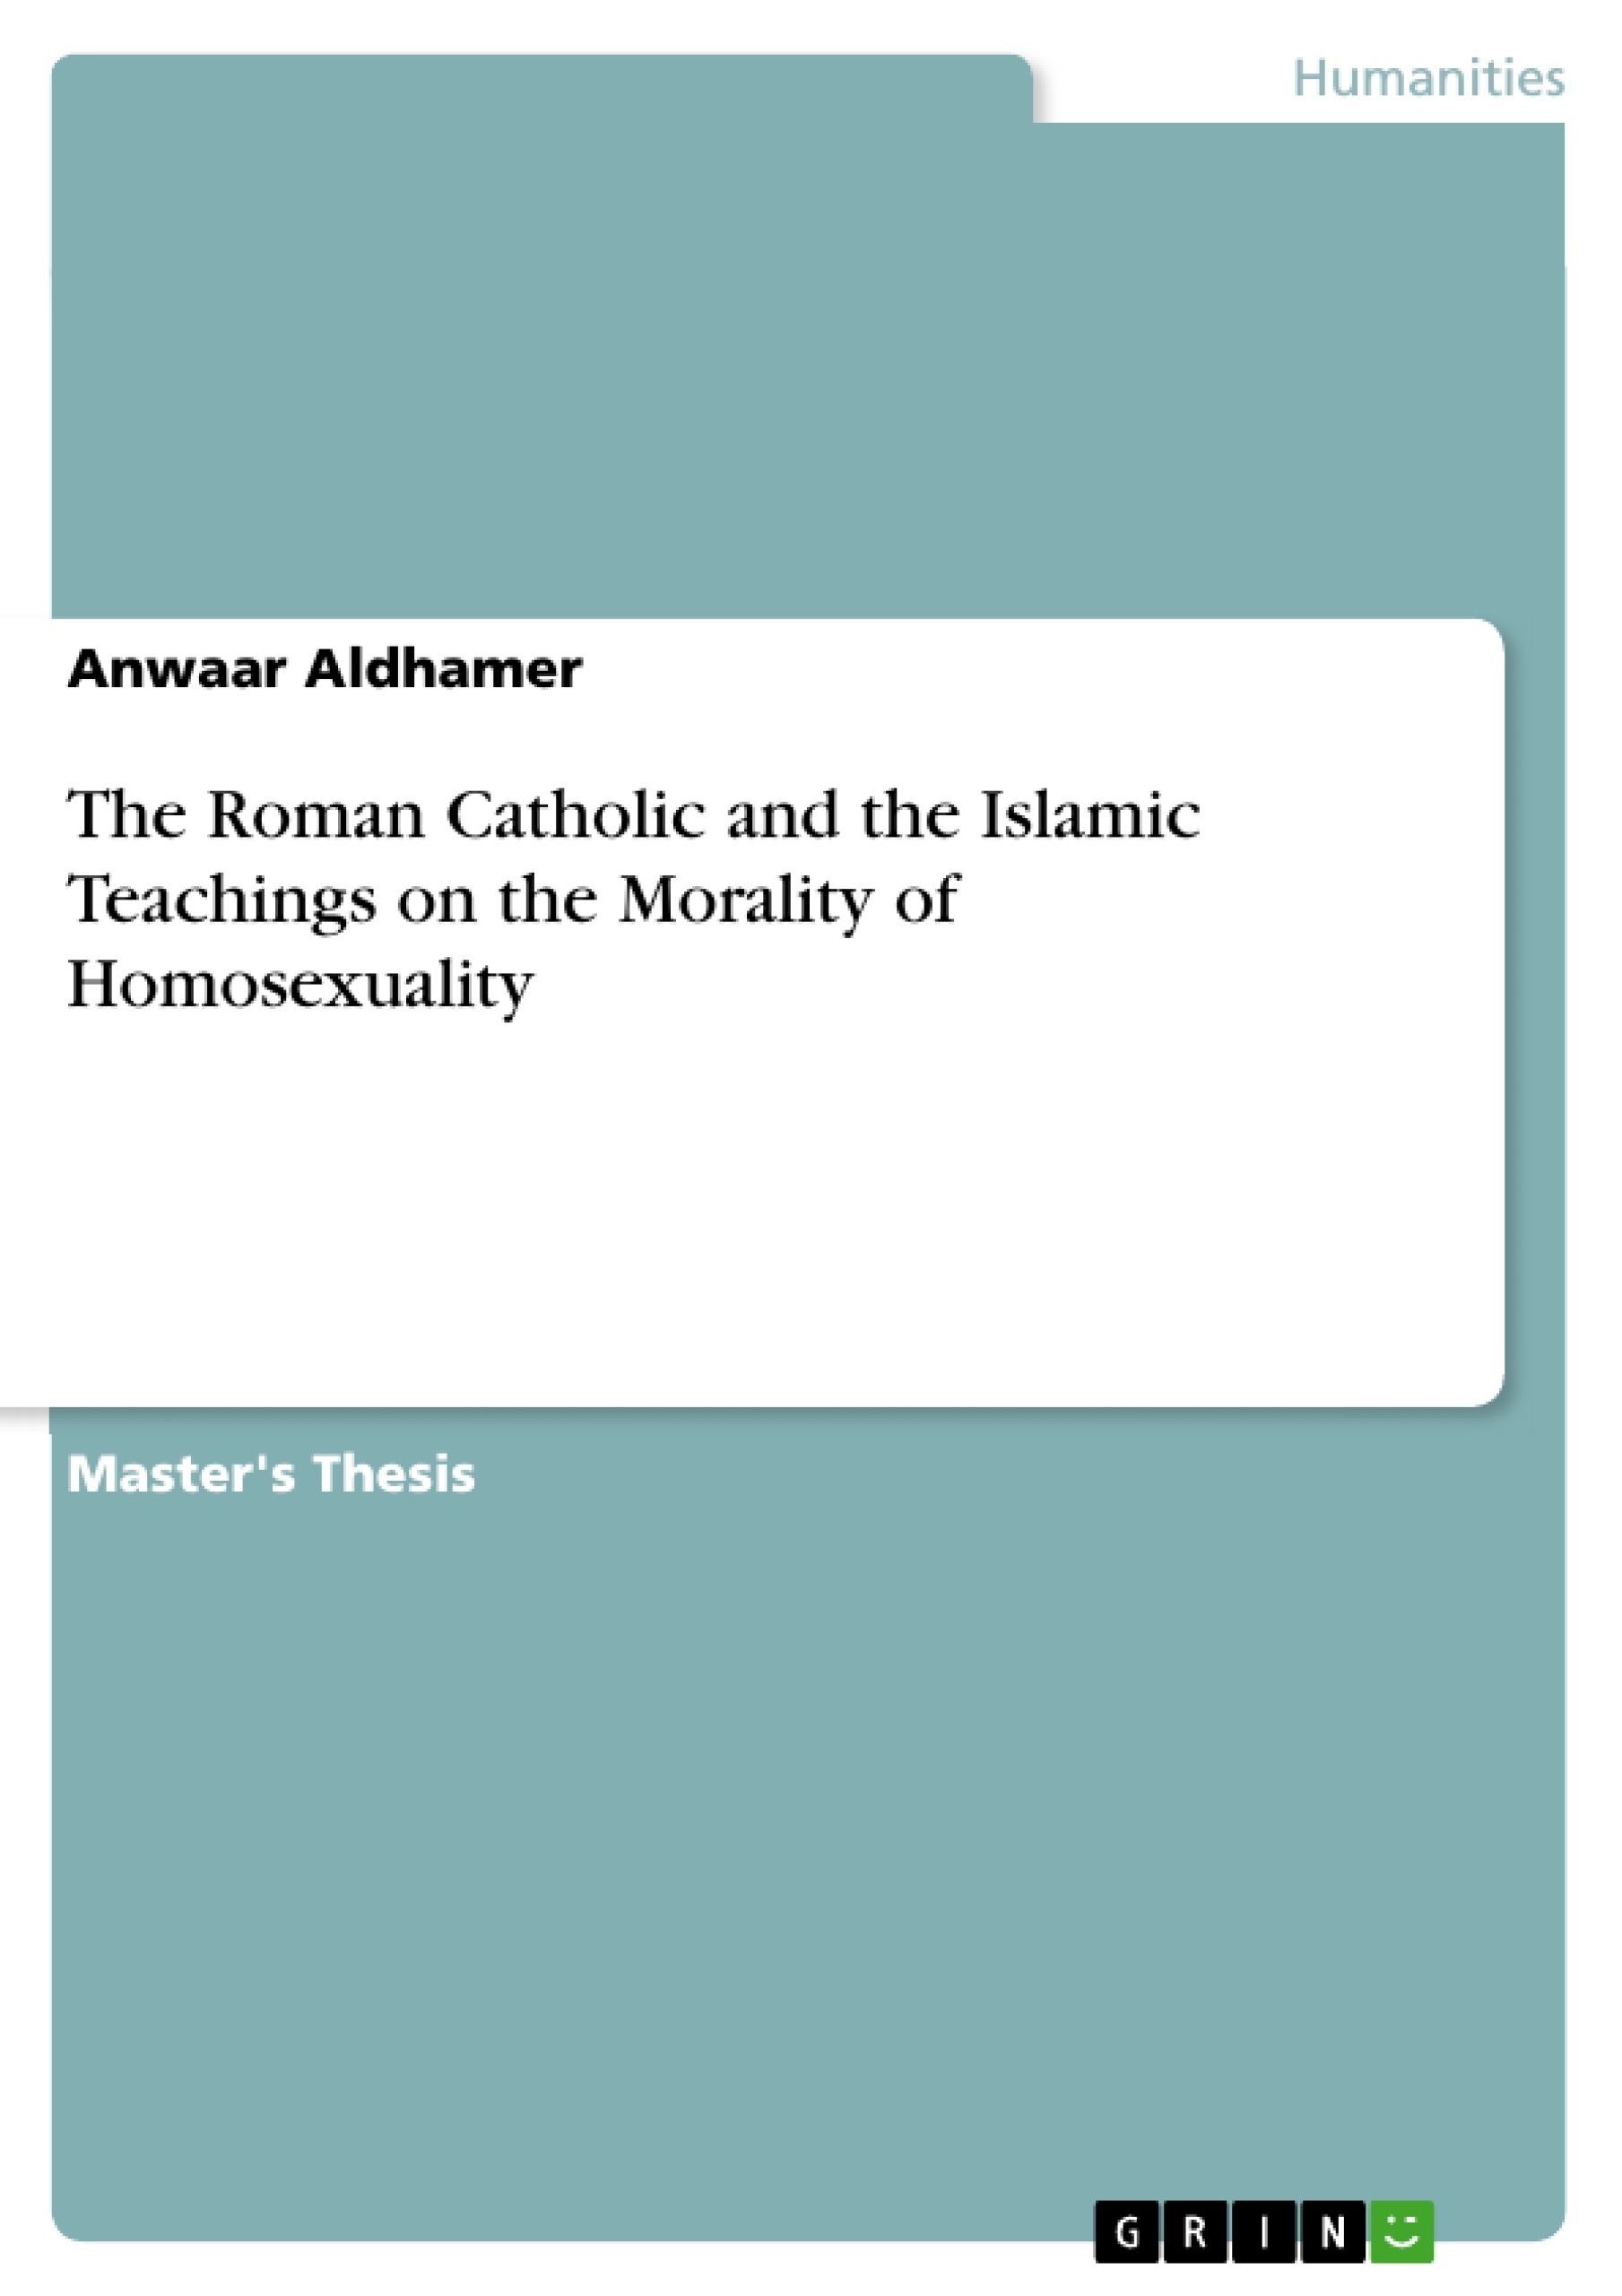 Title: The Roman Catholic and the Islamic Teachings on the Morality of Homosexuality